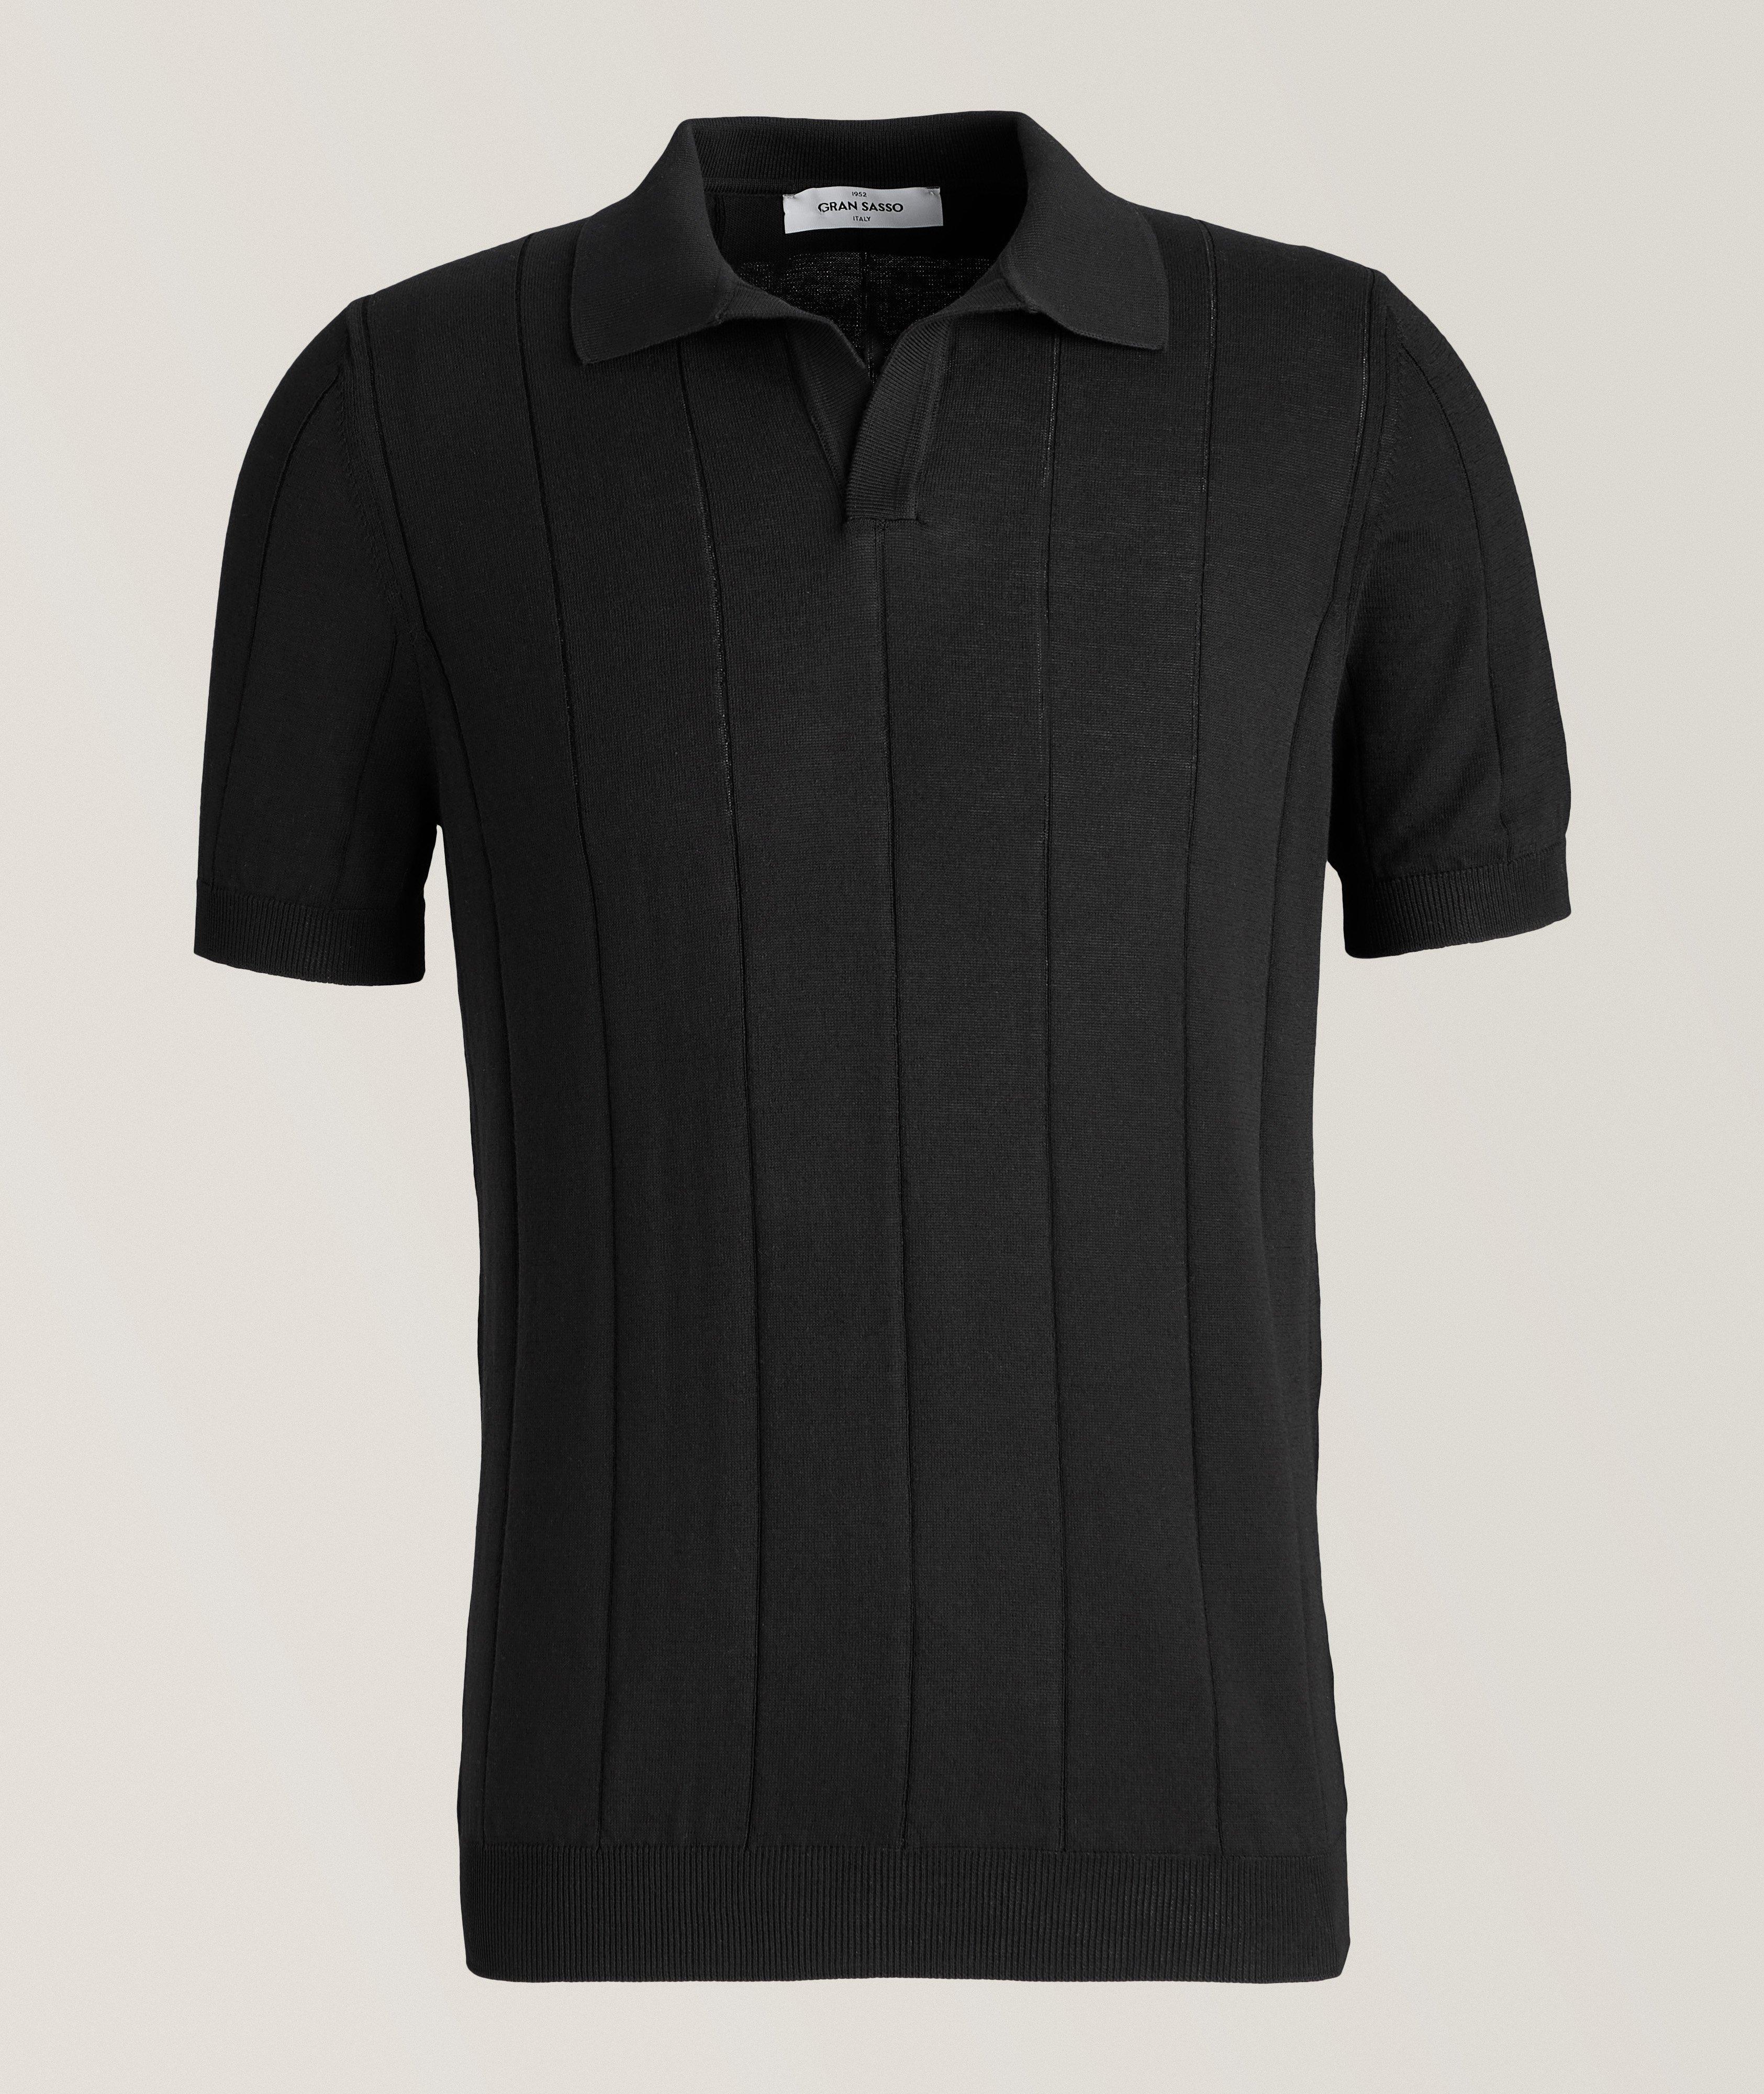 Cotton Dropstitch Knitted Polo image 0